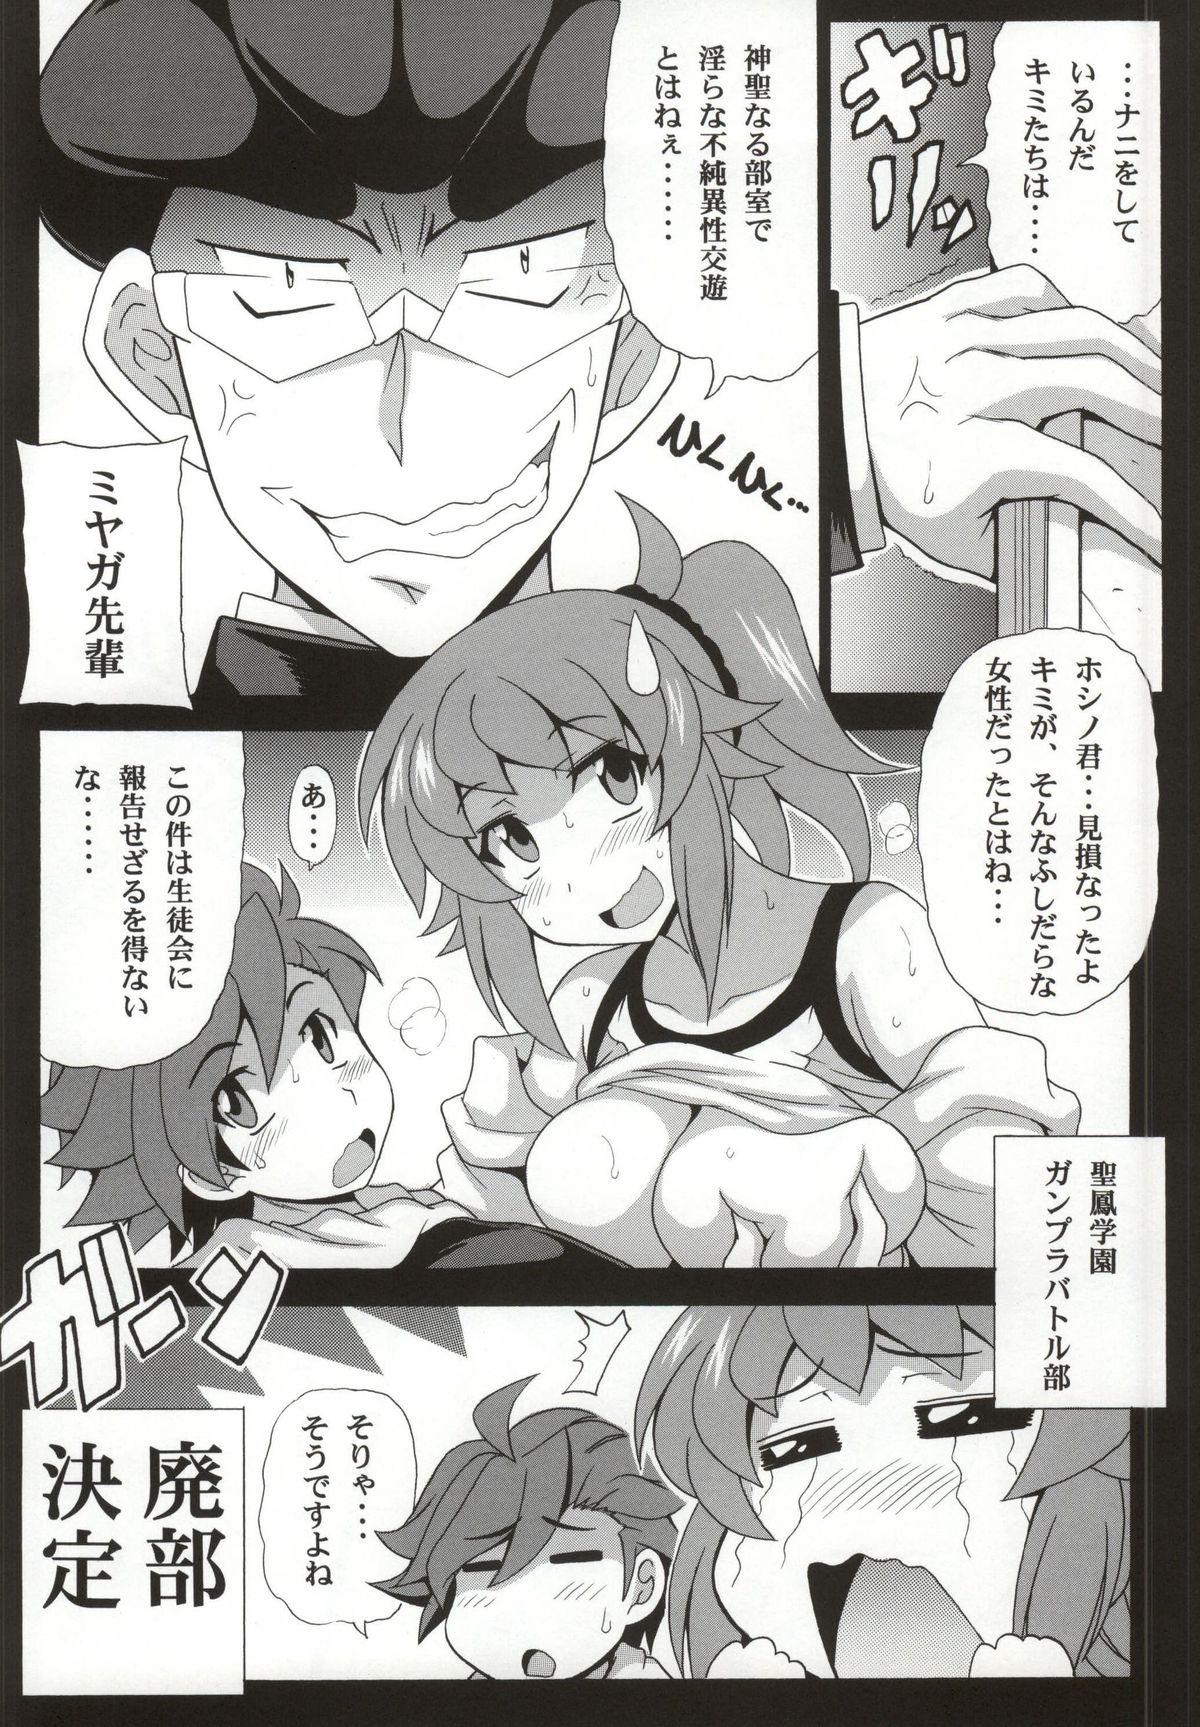 Pigtails Fumina Senpai to H na Gunpla Battle - Gundam build fighters try Cocks - Page 12